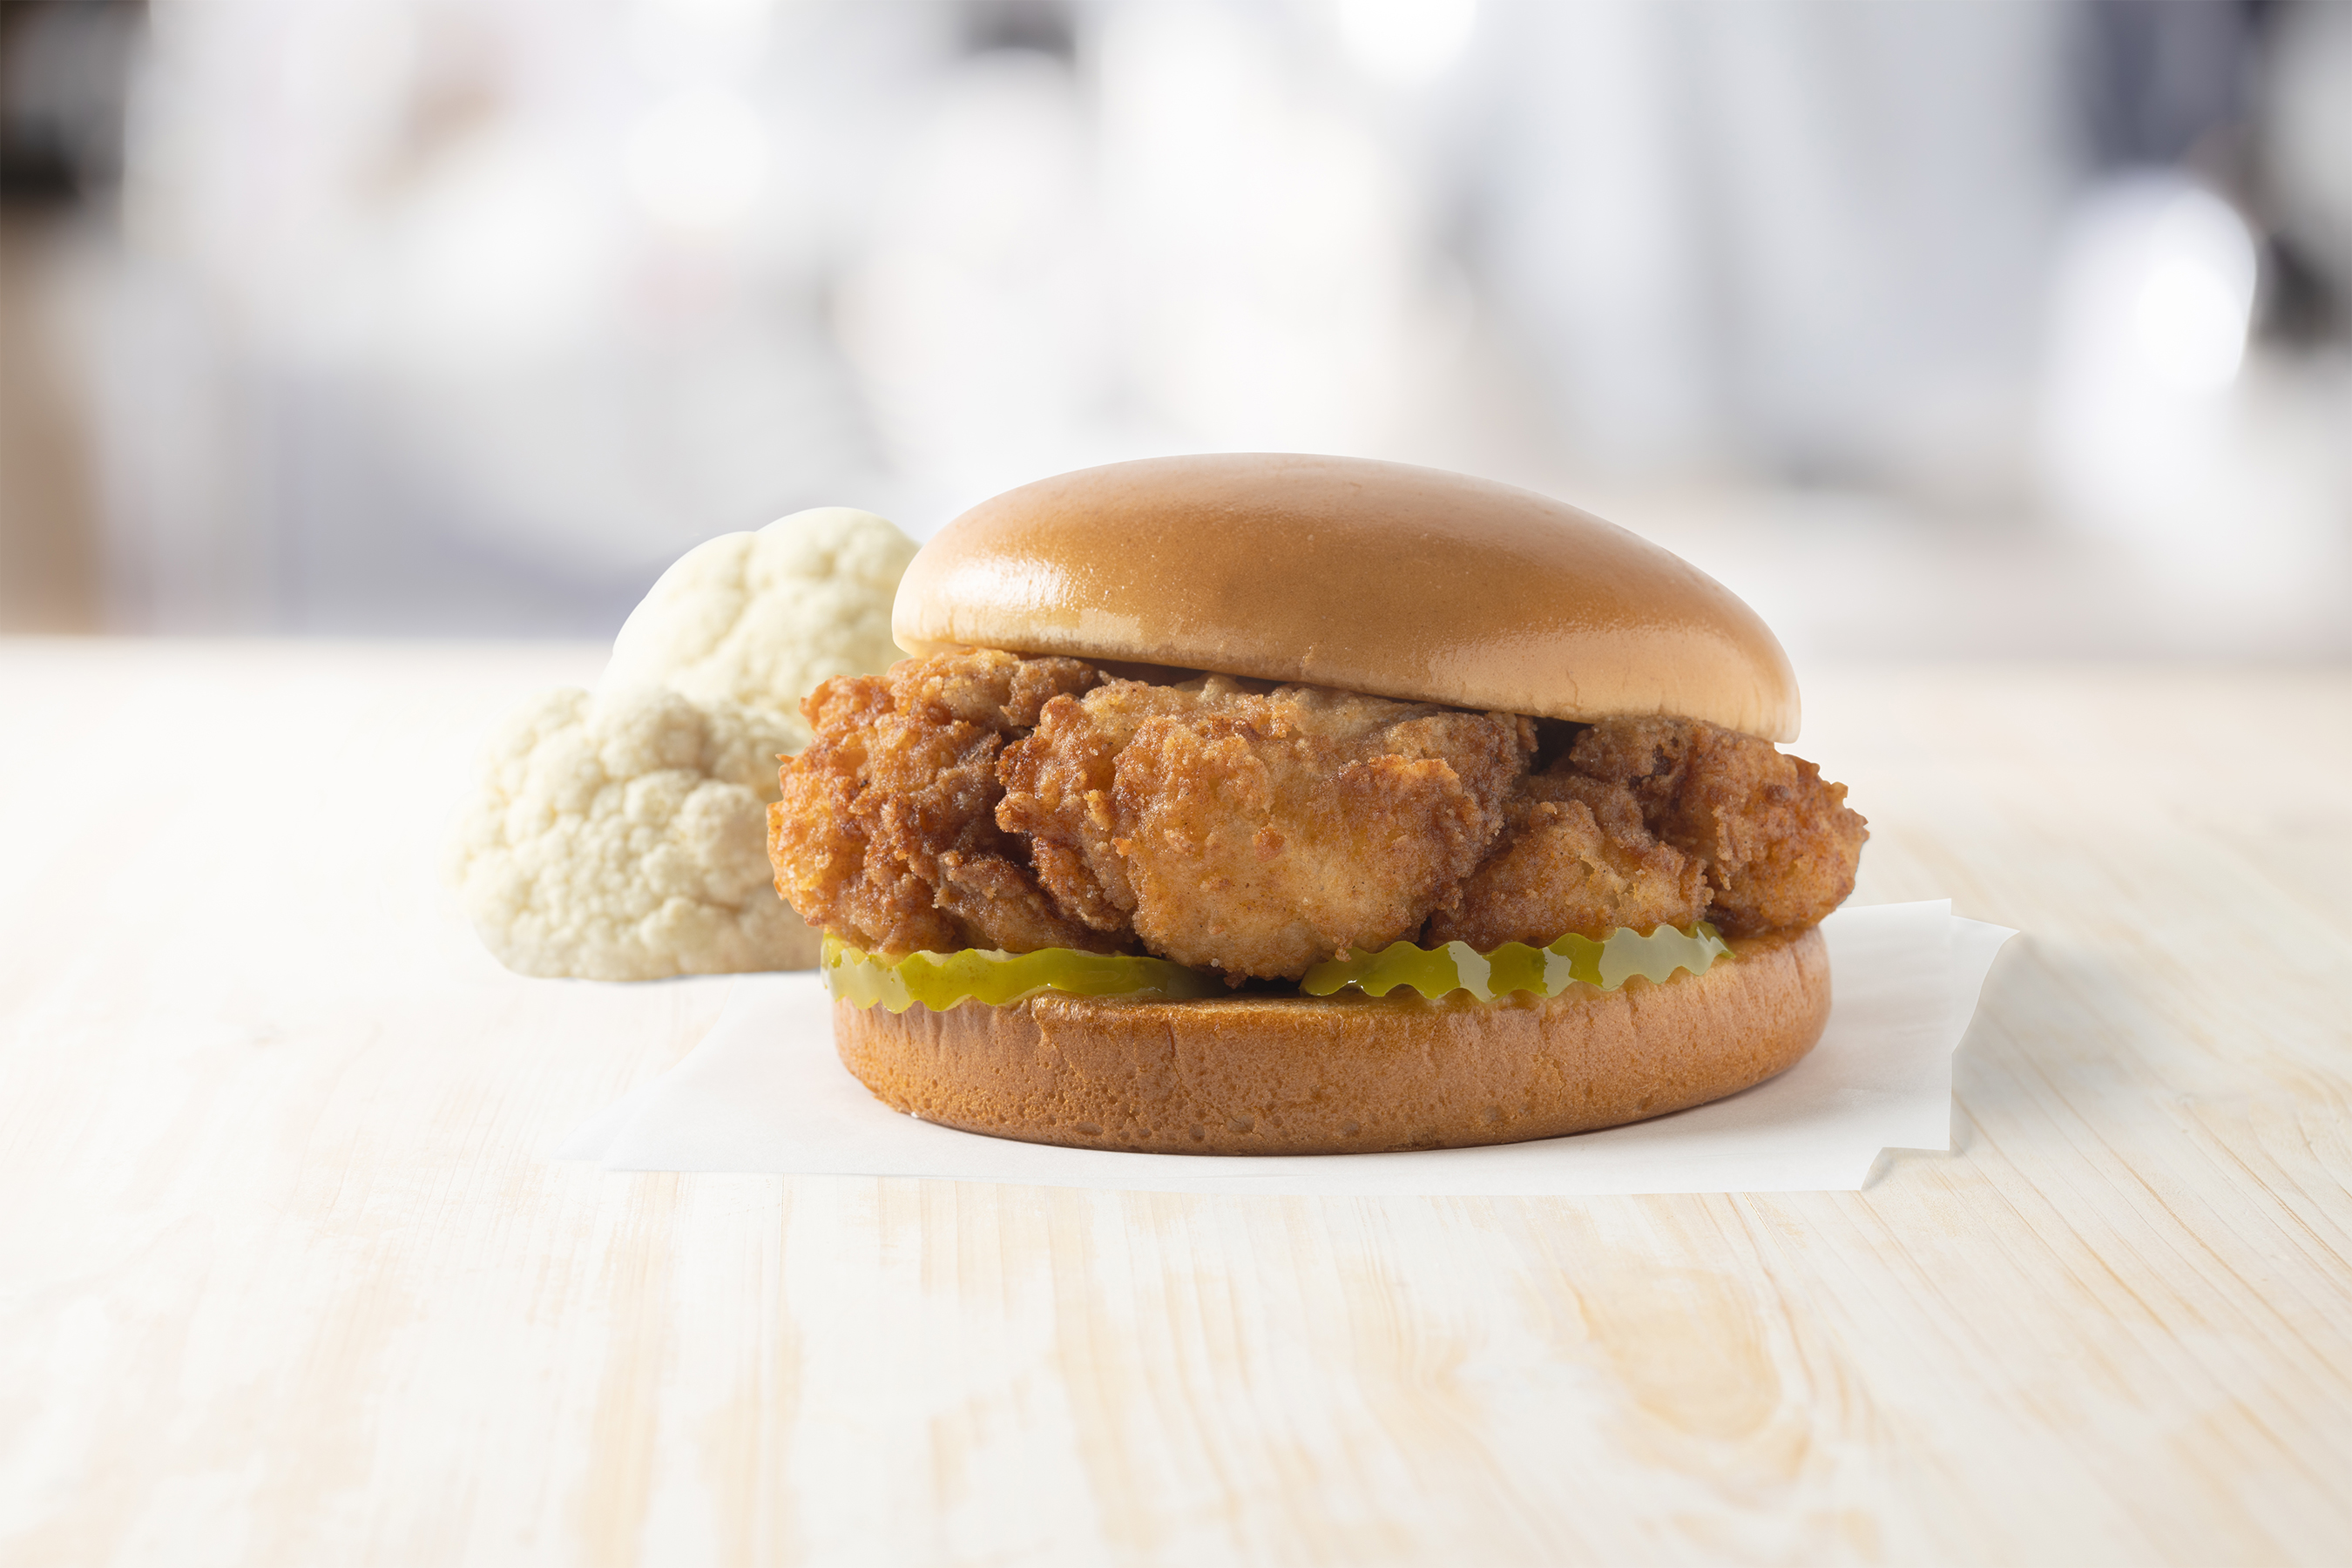 The Chick-fil-A Cauliflower Chicken Sandwich is inspired by flavors from the original Chick-fil-A Chicken Sandwich.